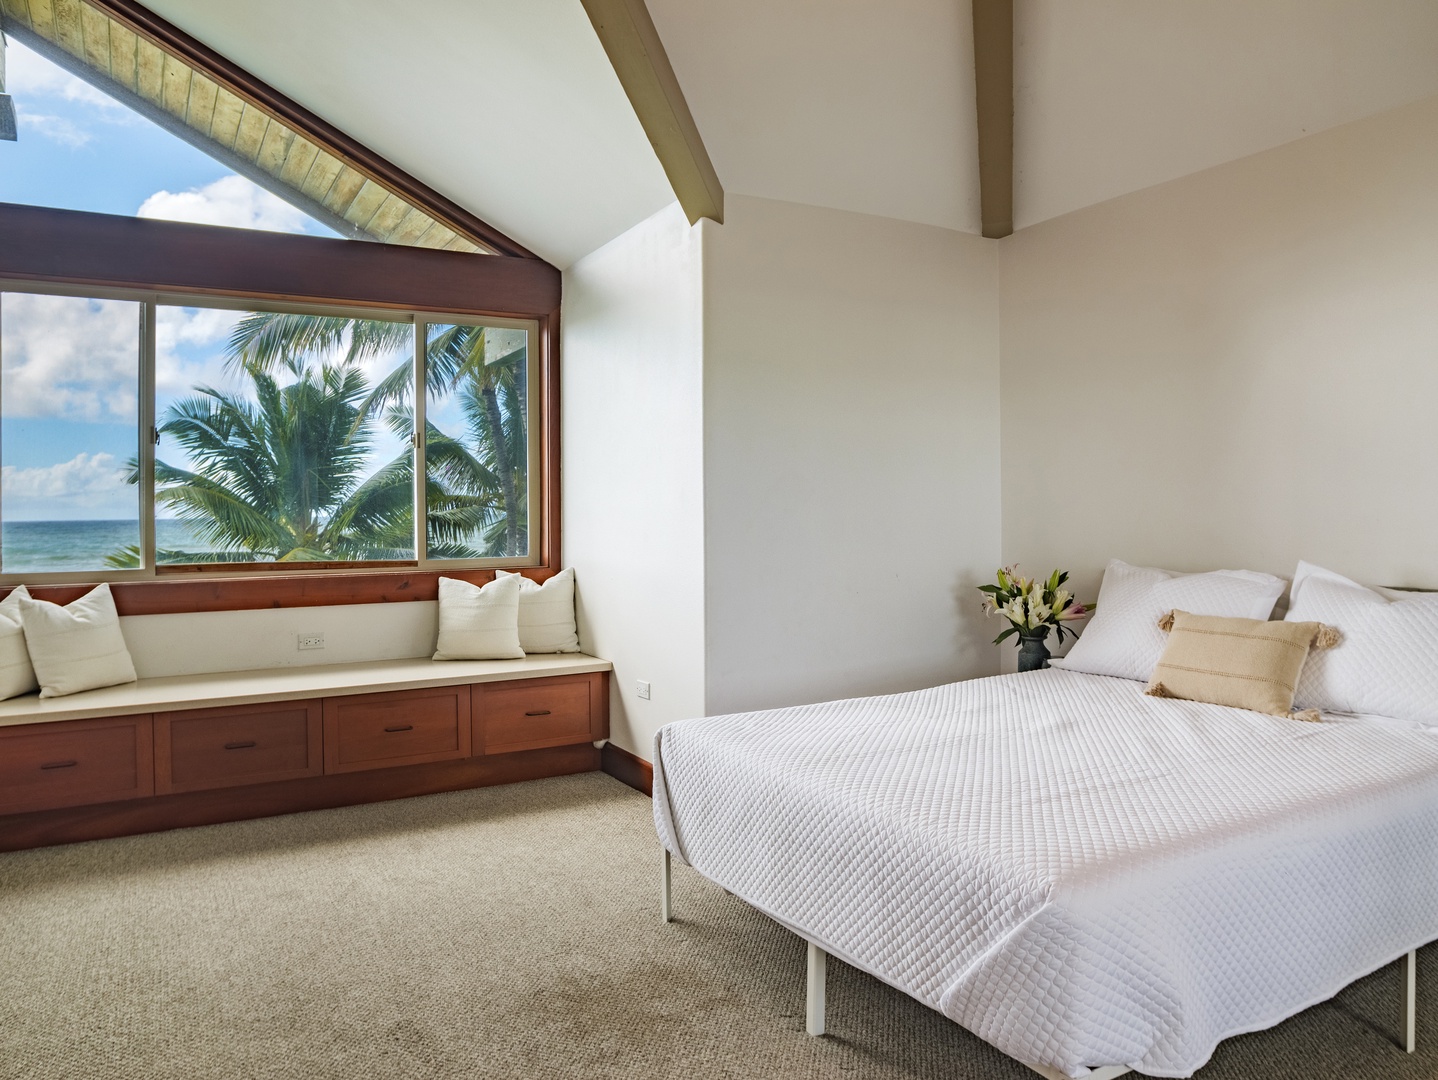 Waianae Vacation Rentals, Konishiki Beachhouse - Guest suite with a nice window seat, a nice spot to read a book or a drink at night.